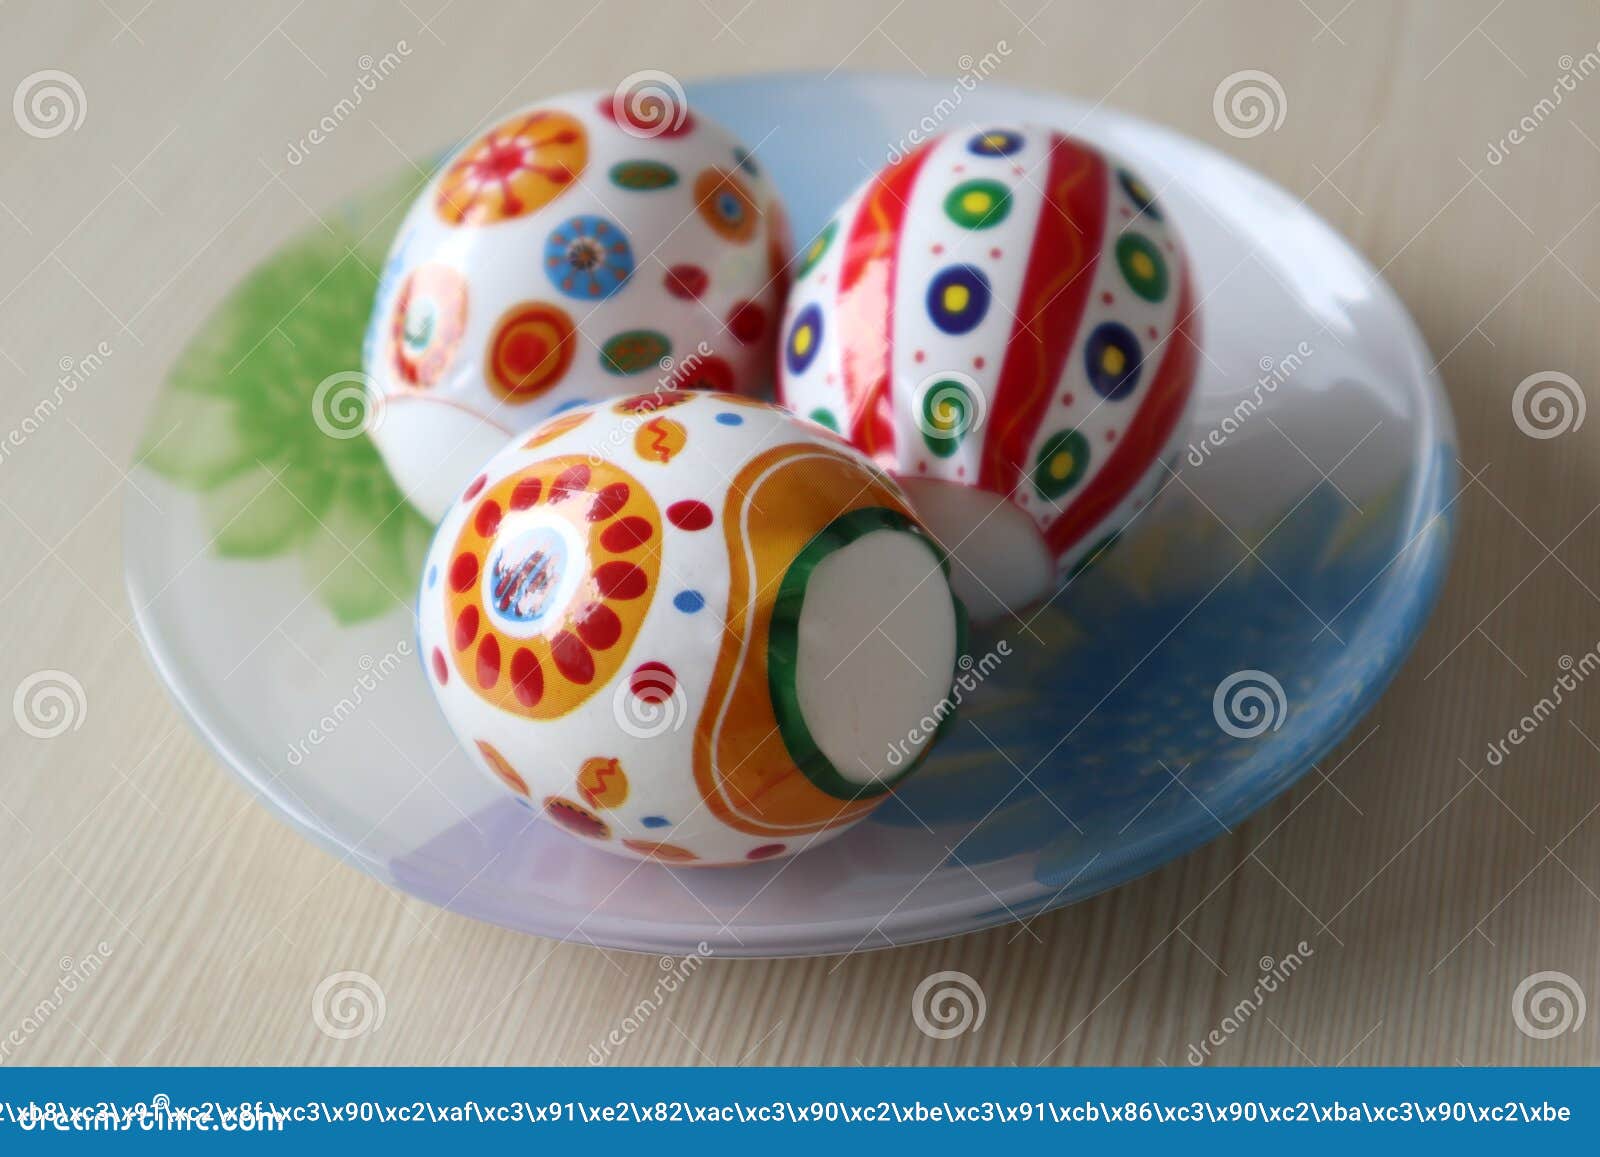 Three Easter Eggs Lying on a Plate Stock Photo - Image of religion ...